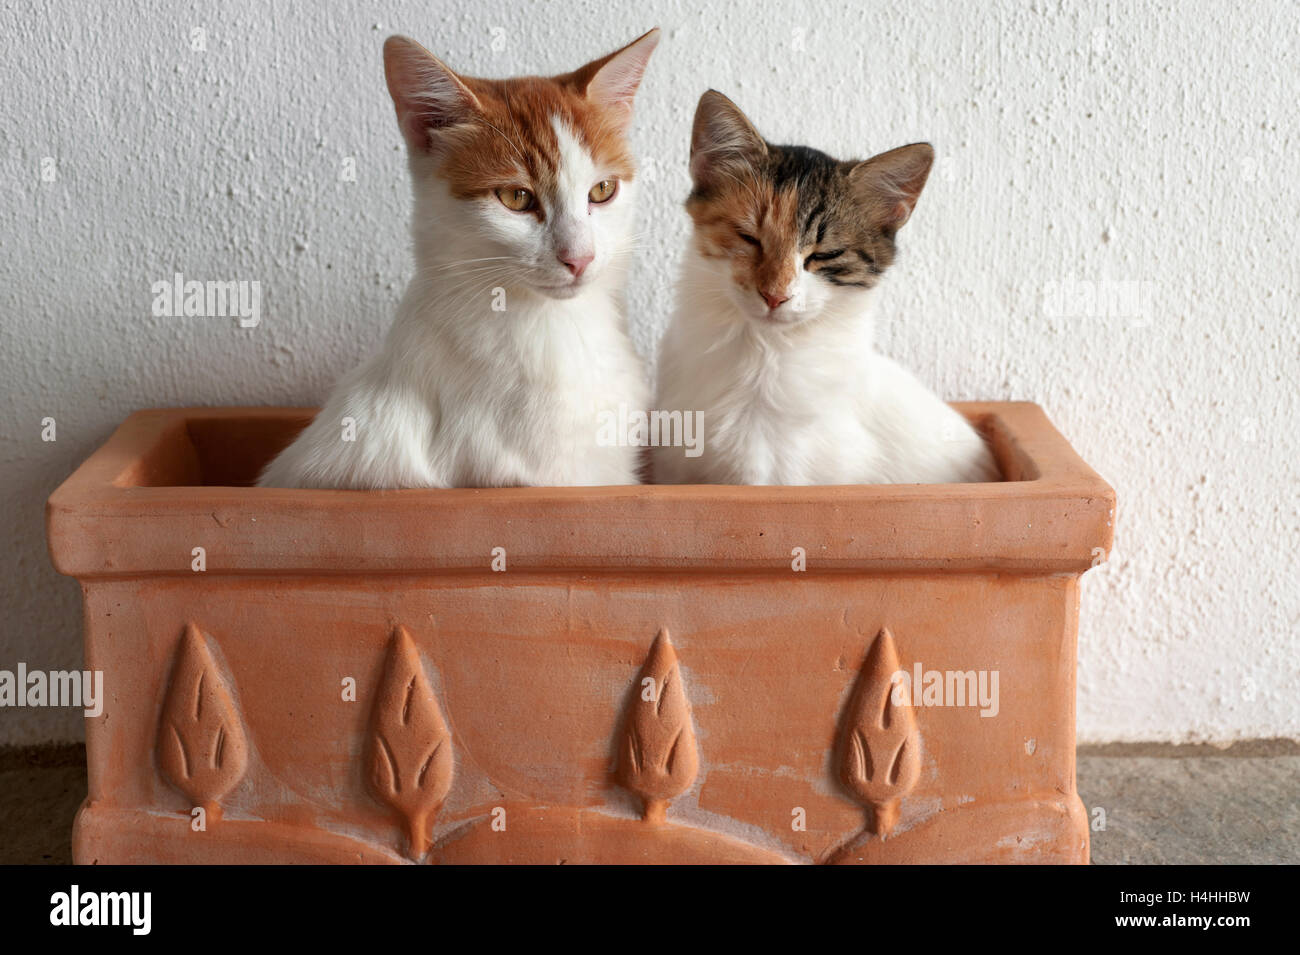 Two sleepy young cats sitting side by side in a flowerpot Stock Photo